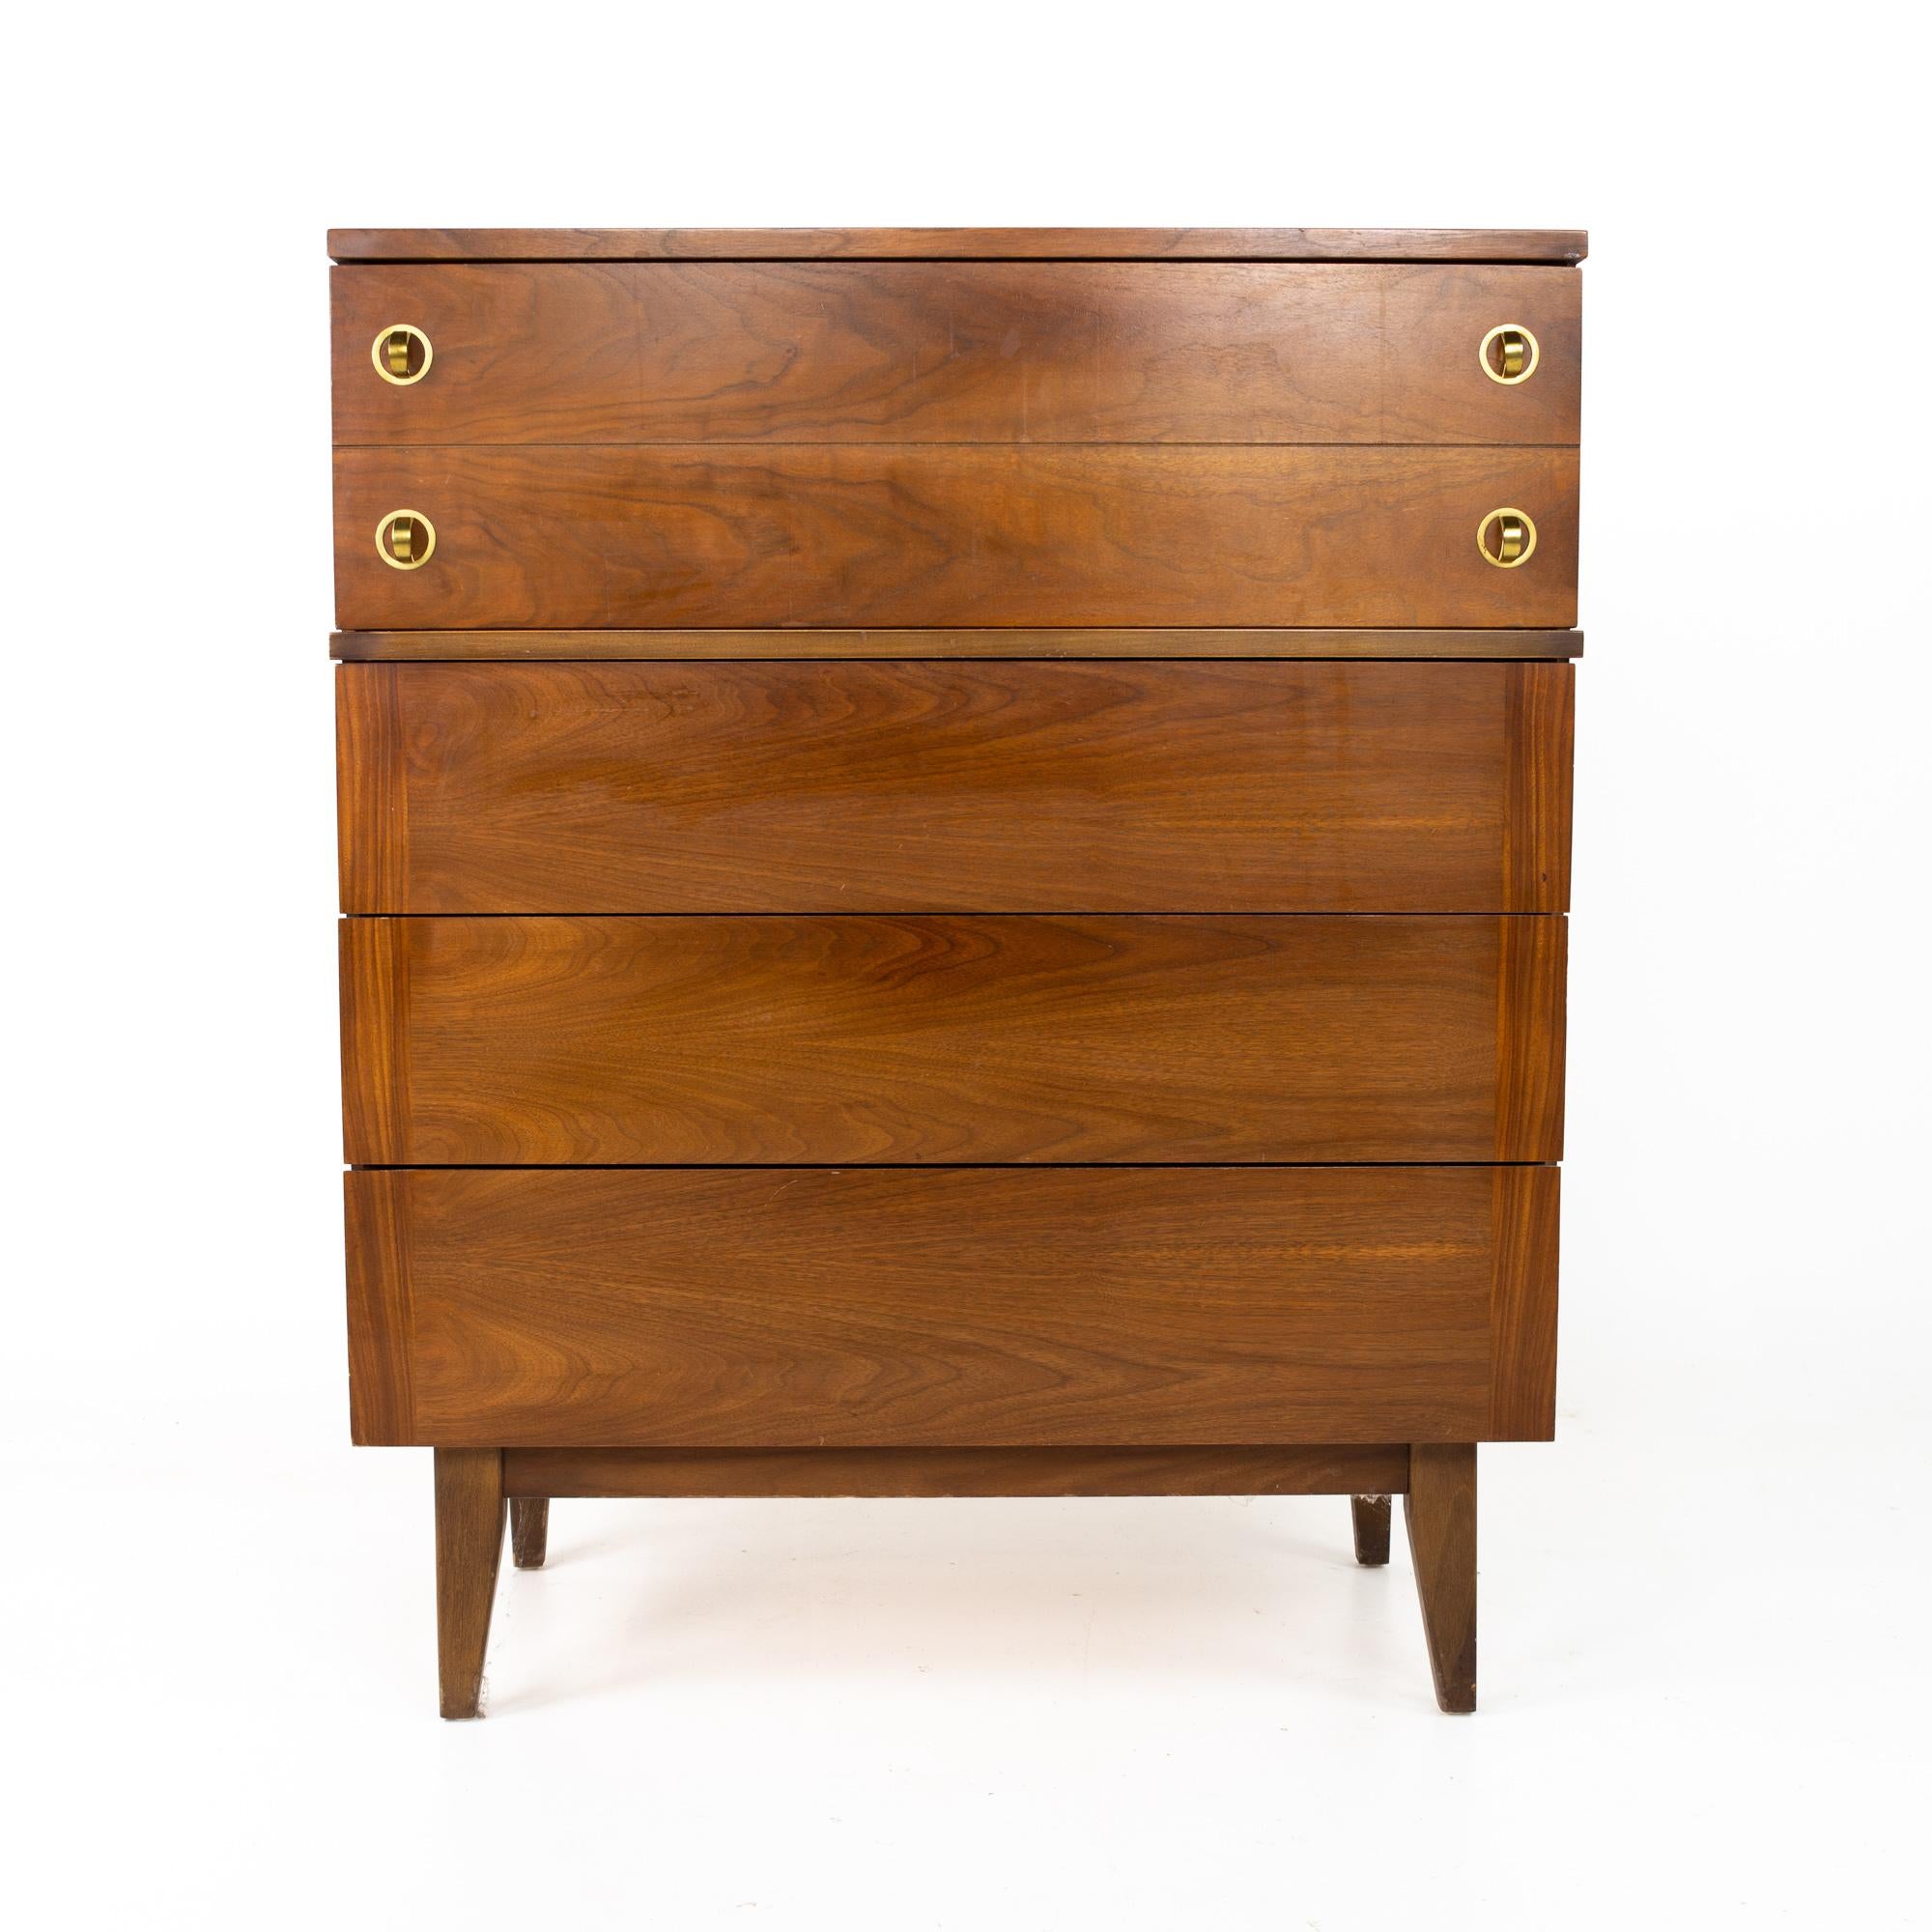 Stanley Mid Century walnut and brass highboy dresser
Dresser measures: 34 wide x 18 deep x 42.5 inches high

This price includes getting this piece in what we call restored vintage condition. That means the piece is permanently fixed upon purchase